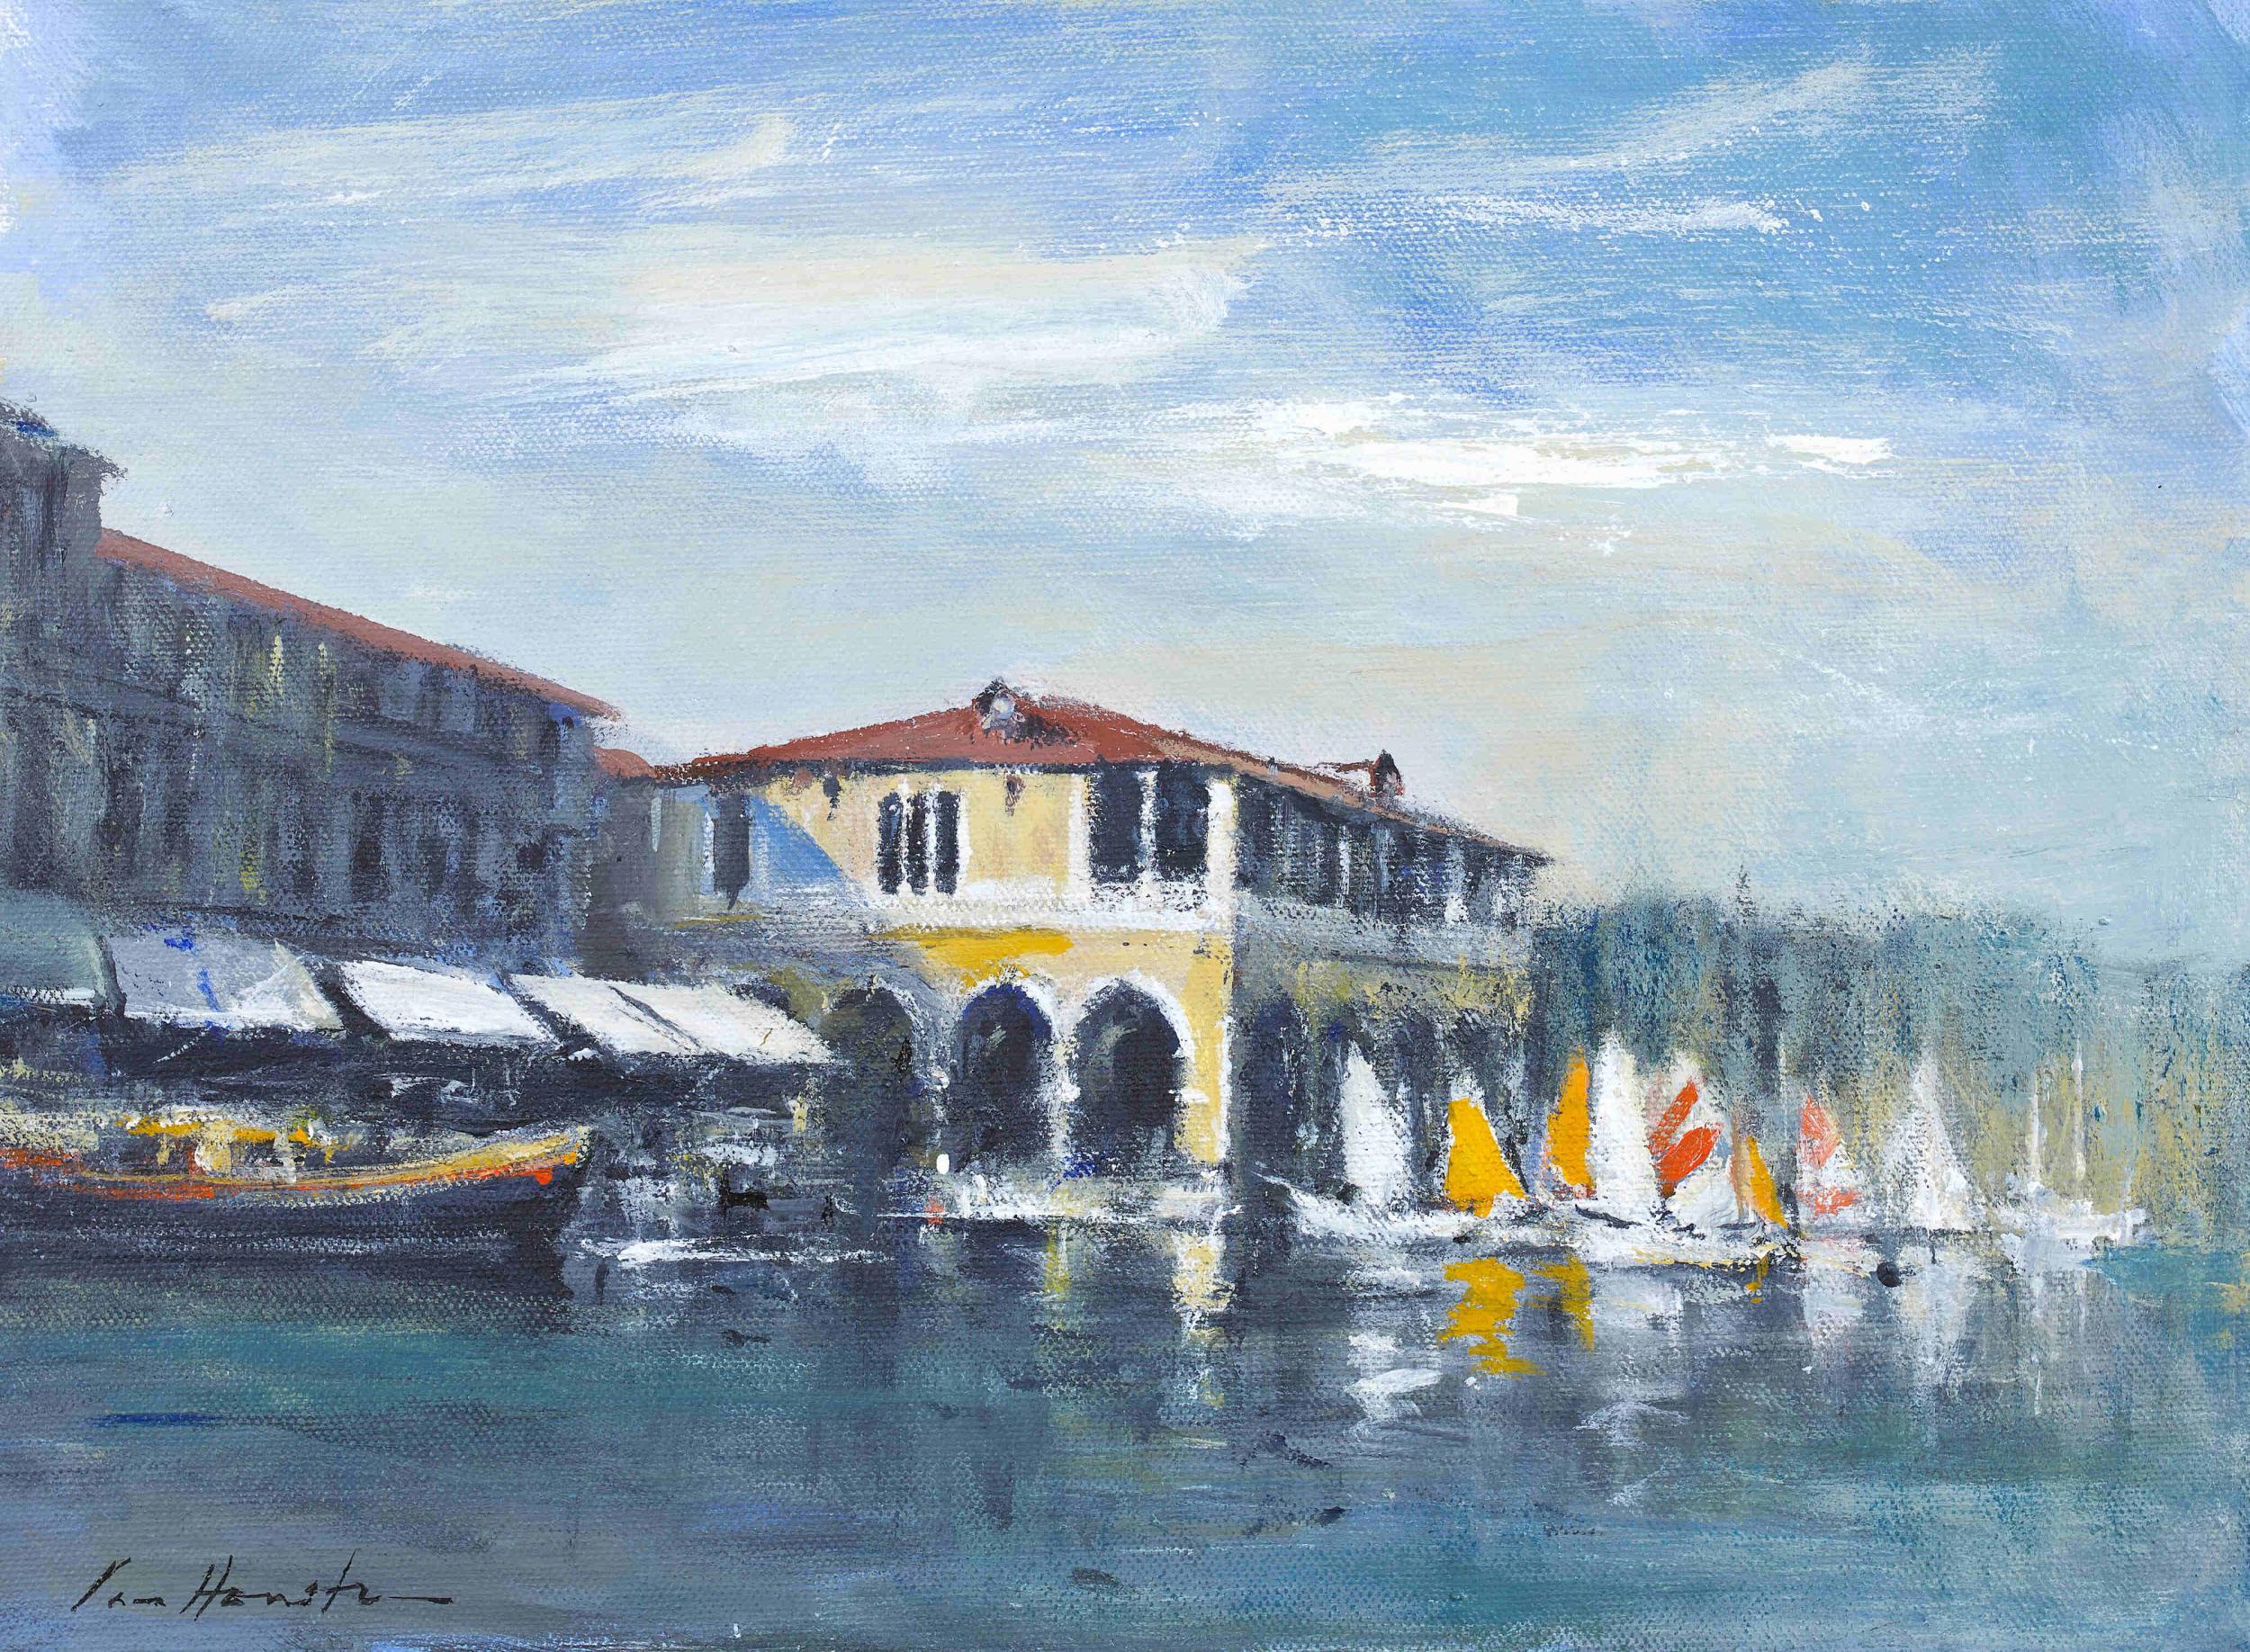 Sails by the Fish Market, Venice - Painting by Unknown